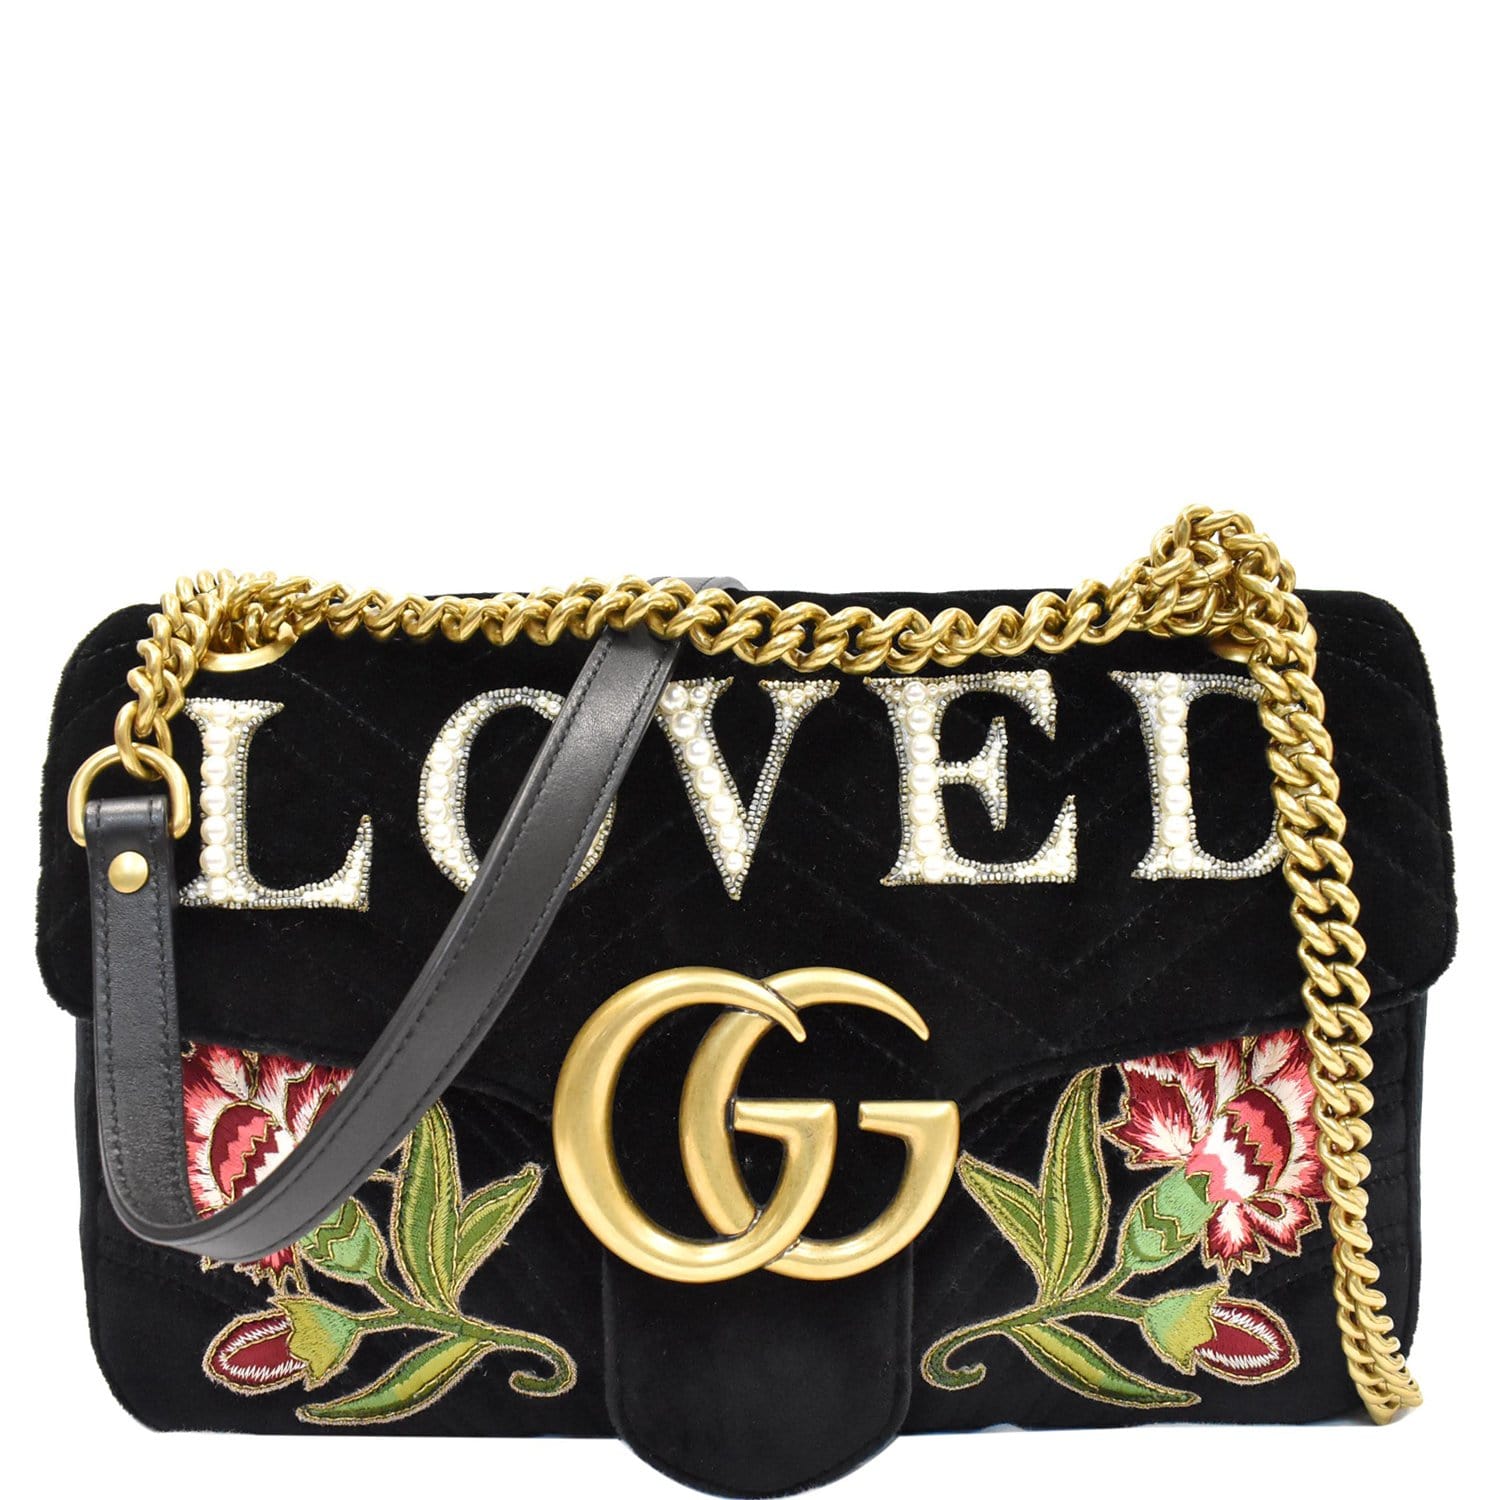 Gucci Gift Guide 2016 - Spotted Fashion